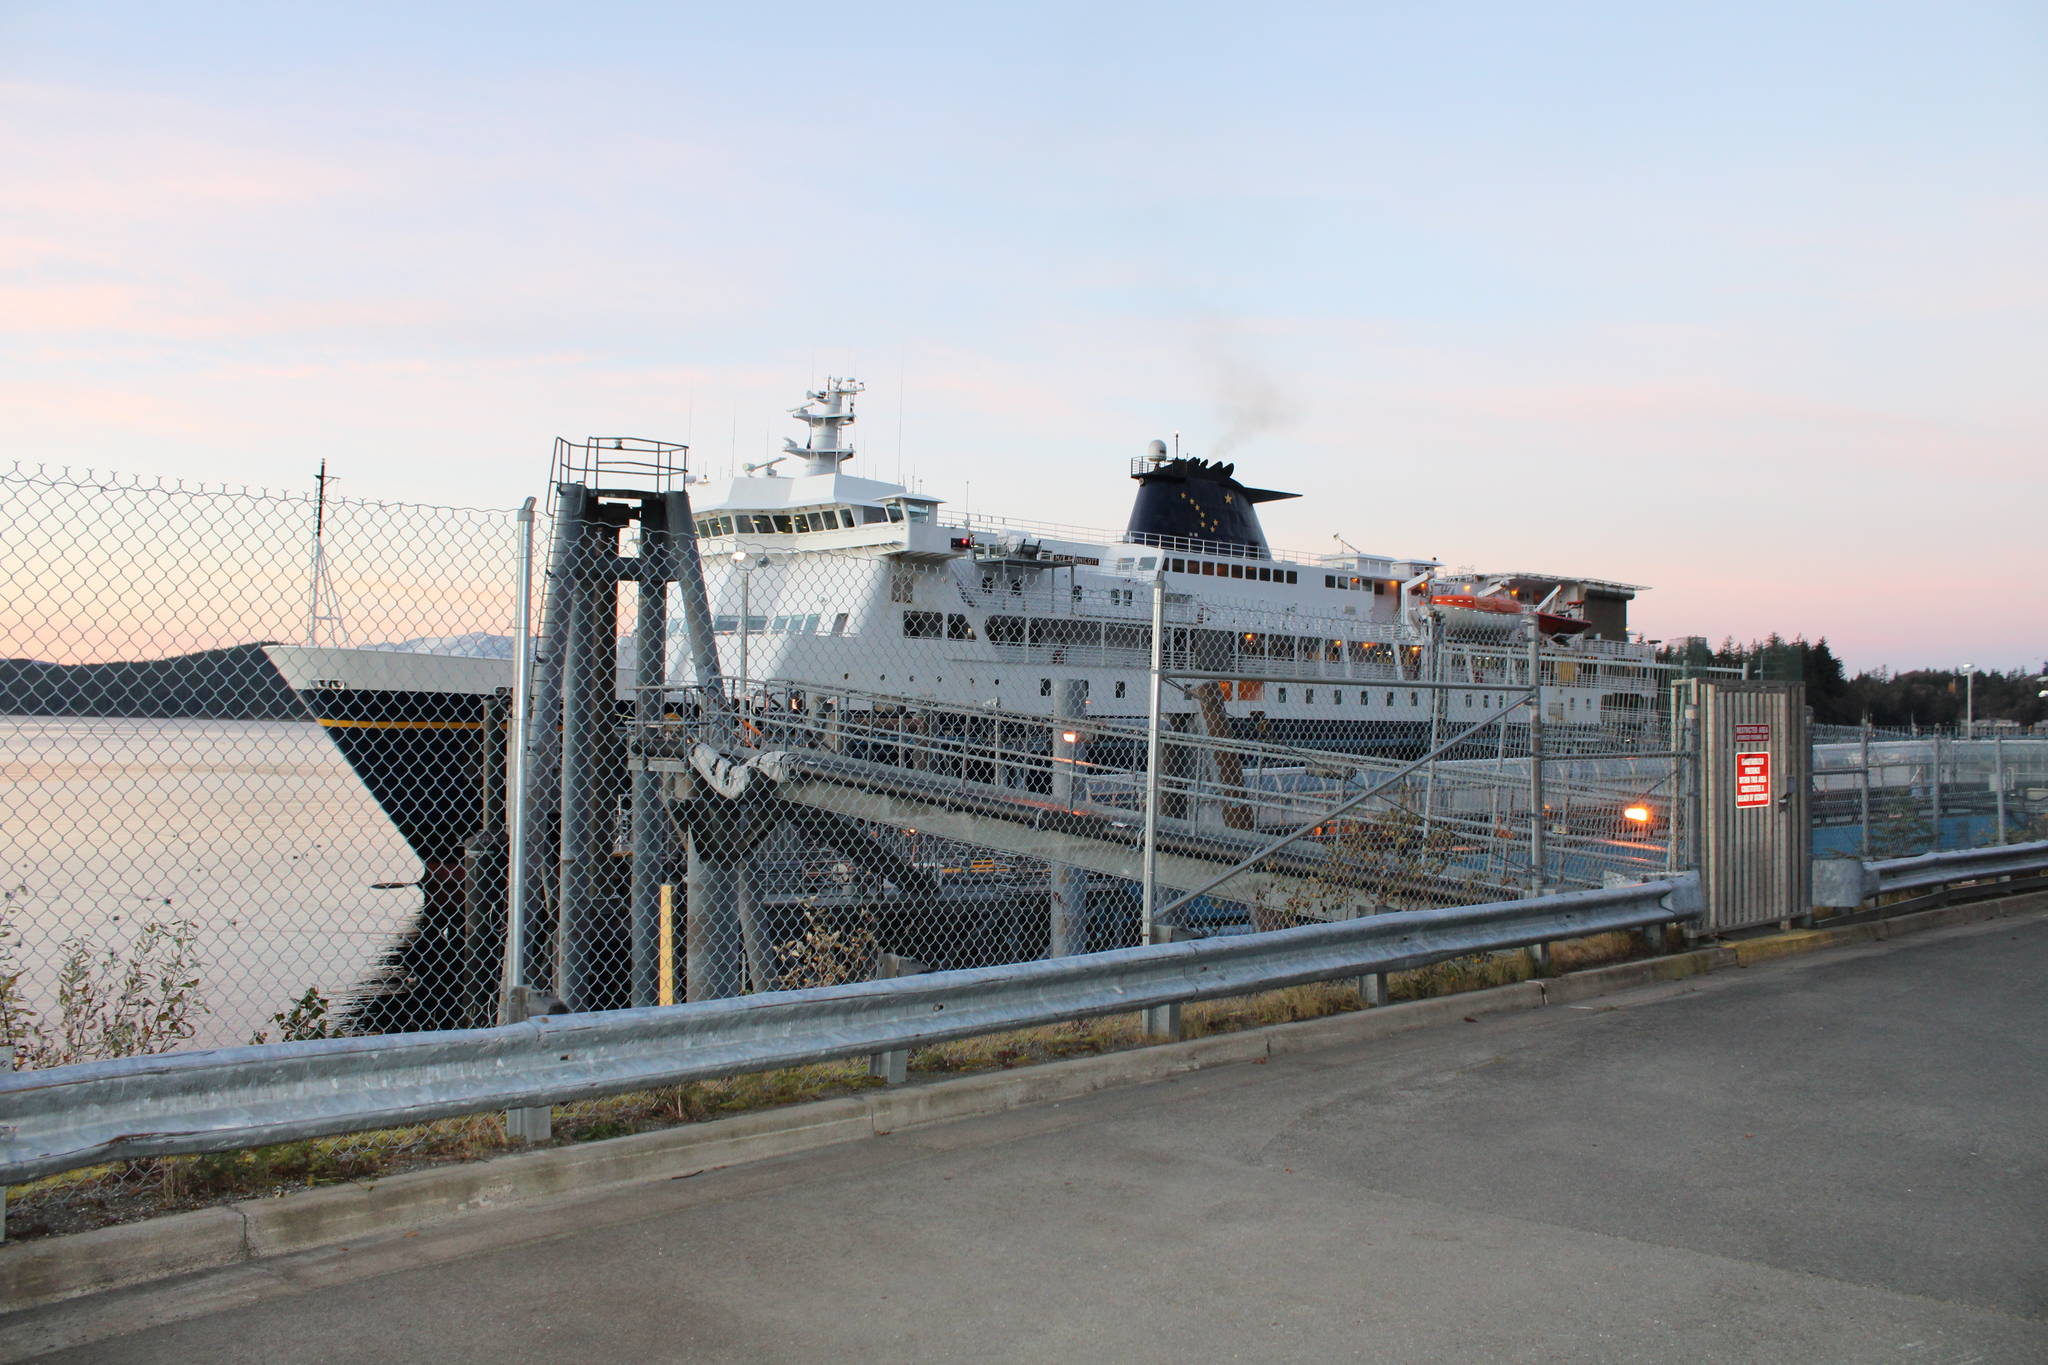 The MV Kennicott, docked at the Auke Bay Ferry Terminal, was out of commission awaiting repairs on Friday, Oct. 23, 2020. Chairman of the Alaska Marine Highway Reshaping Workgroup Admiral Tom Barrett said the system's inability to plan long-term was hindering its ability to be effective. (Ben Hohenstatt / Juneau Empire)